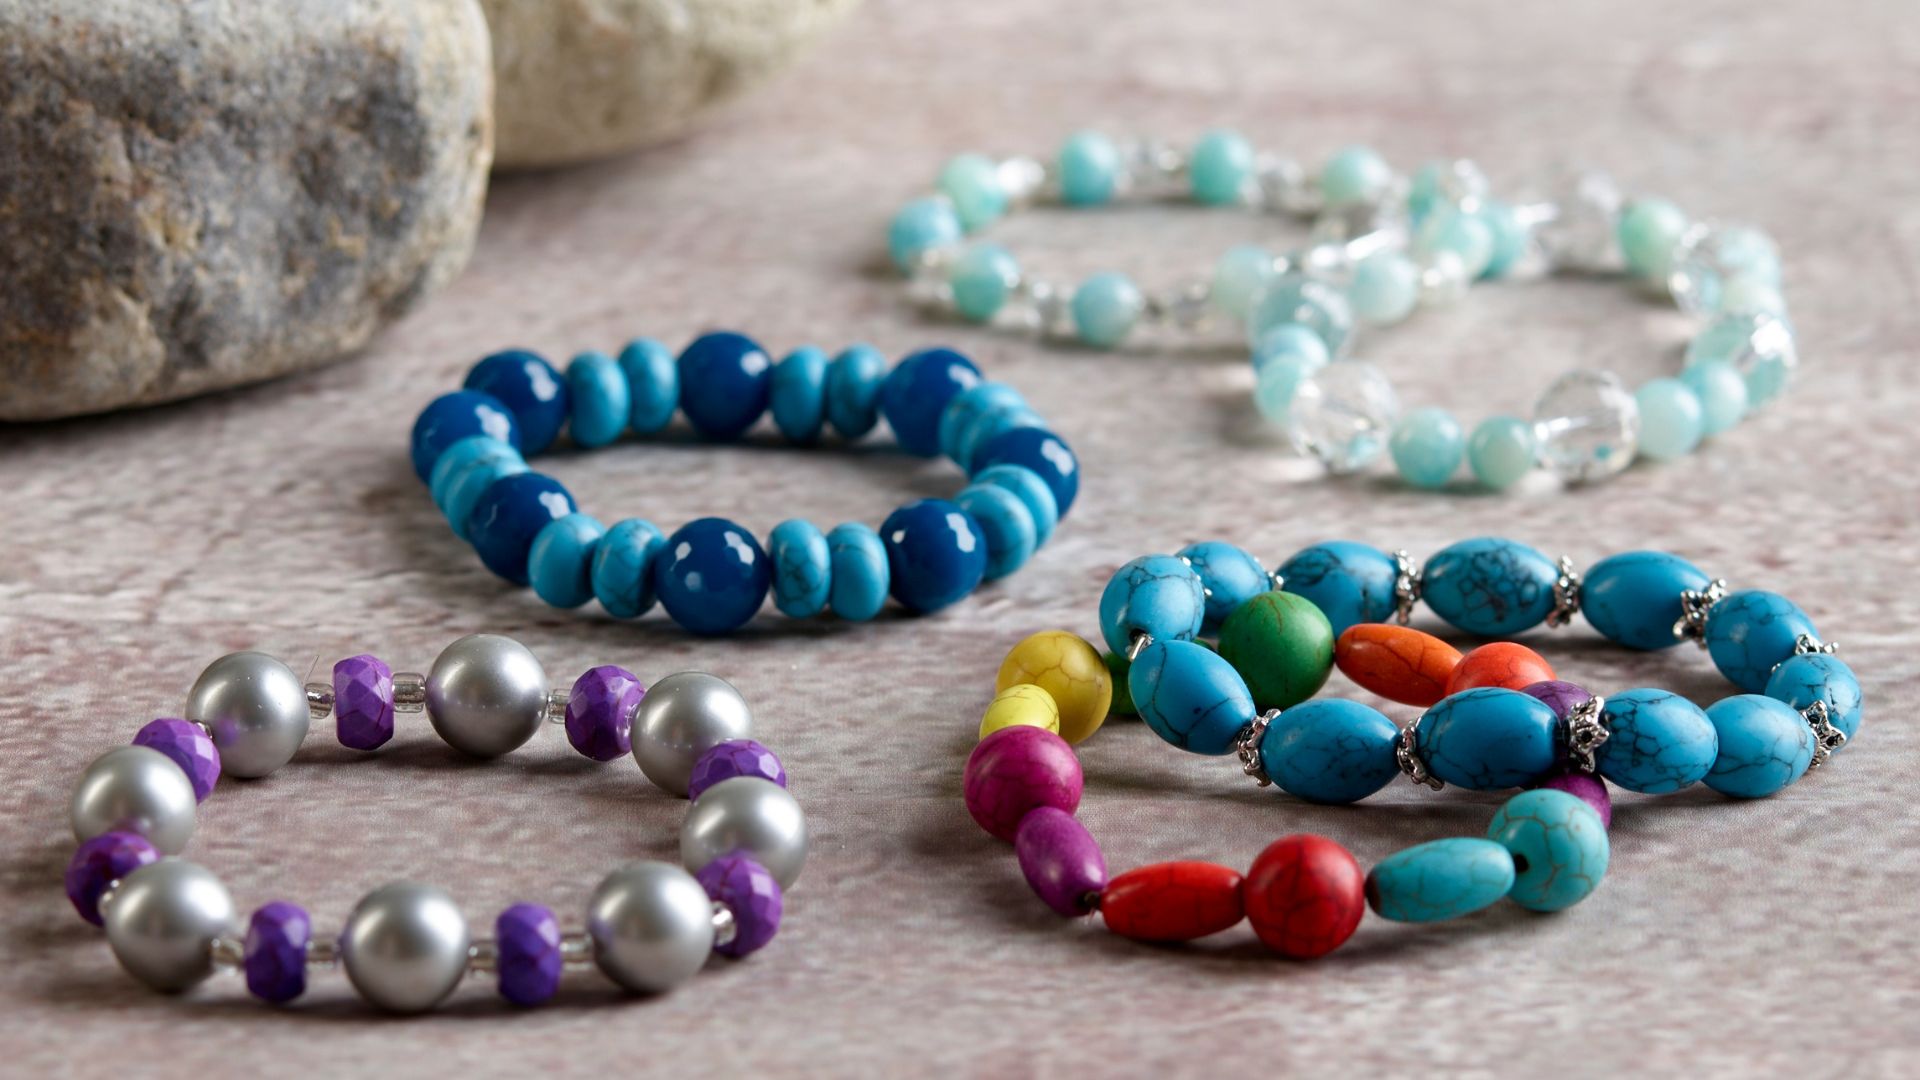 Learn to string beads - the right way! 